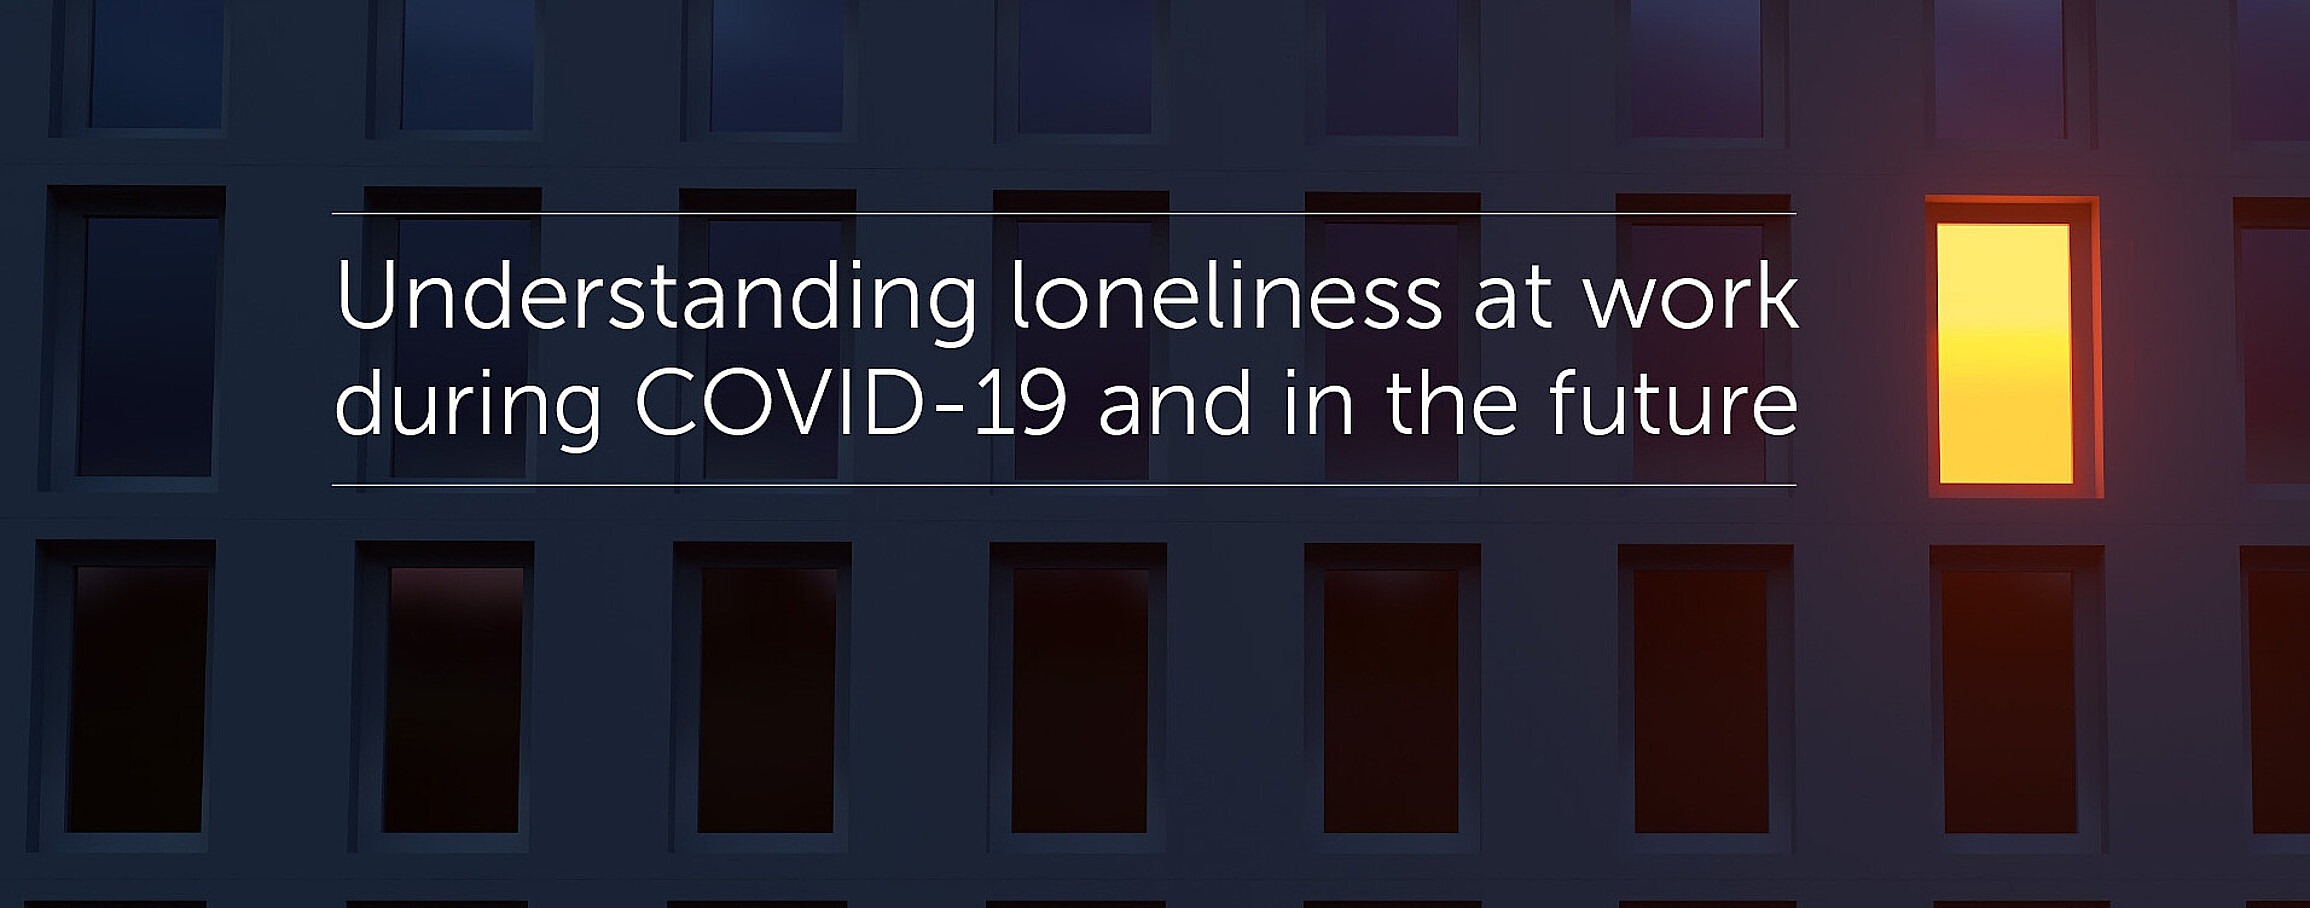 Understanding loneliness at work during COVID-19 and in the future